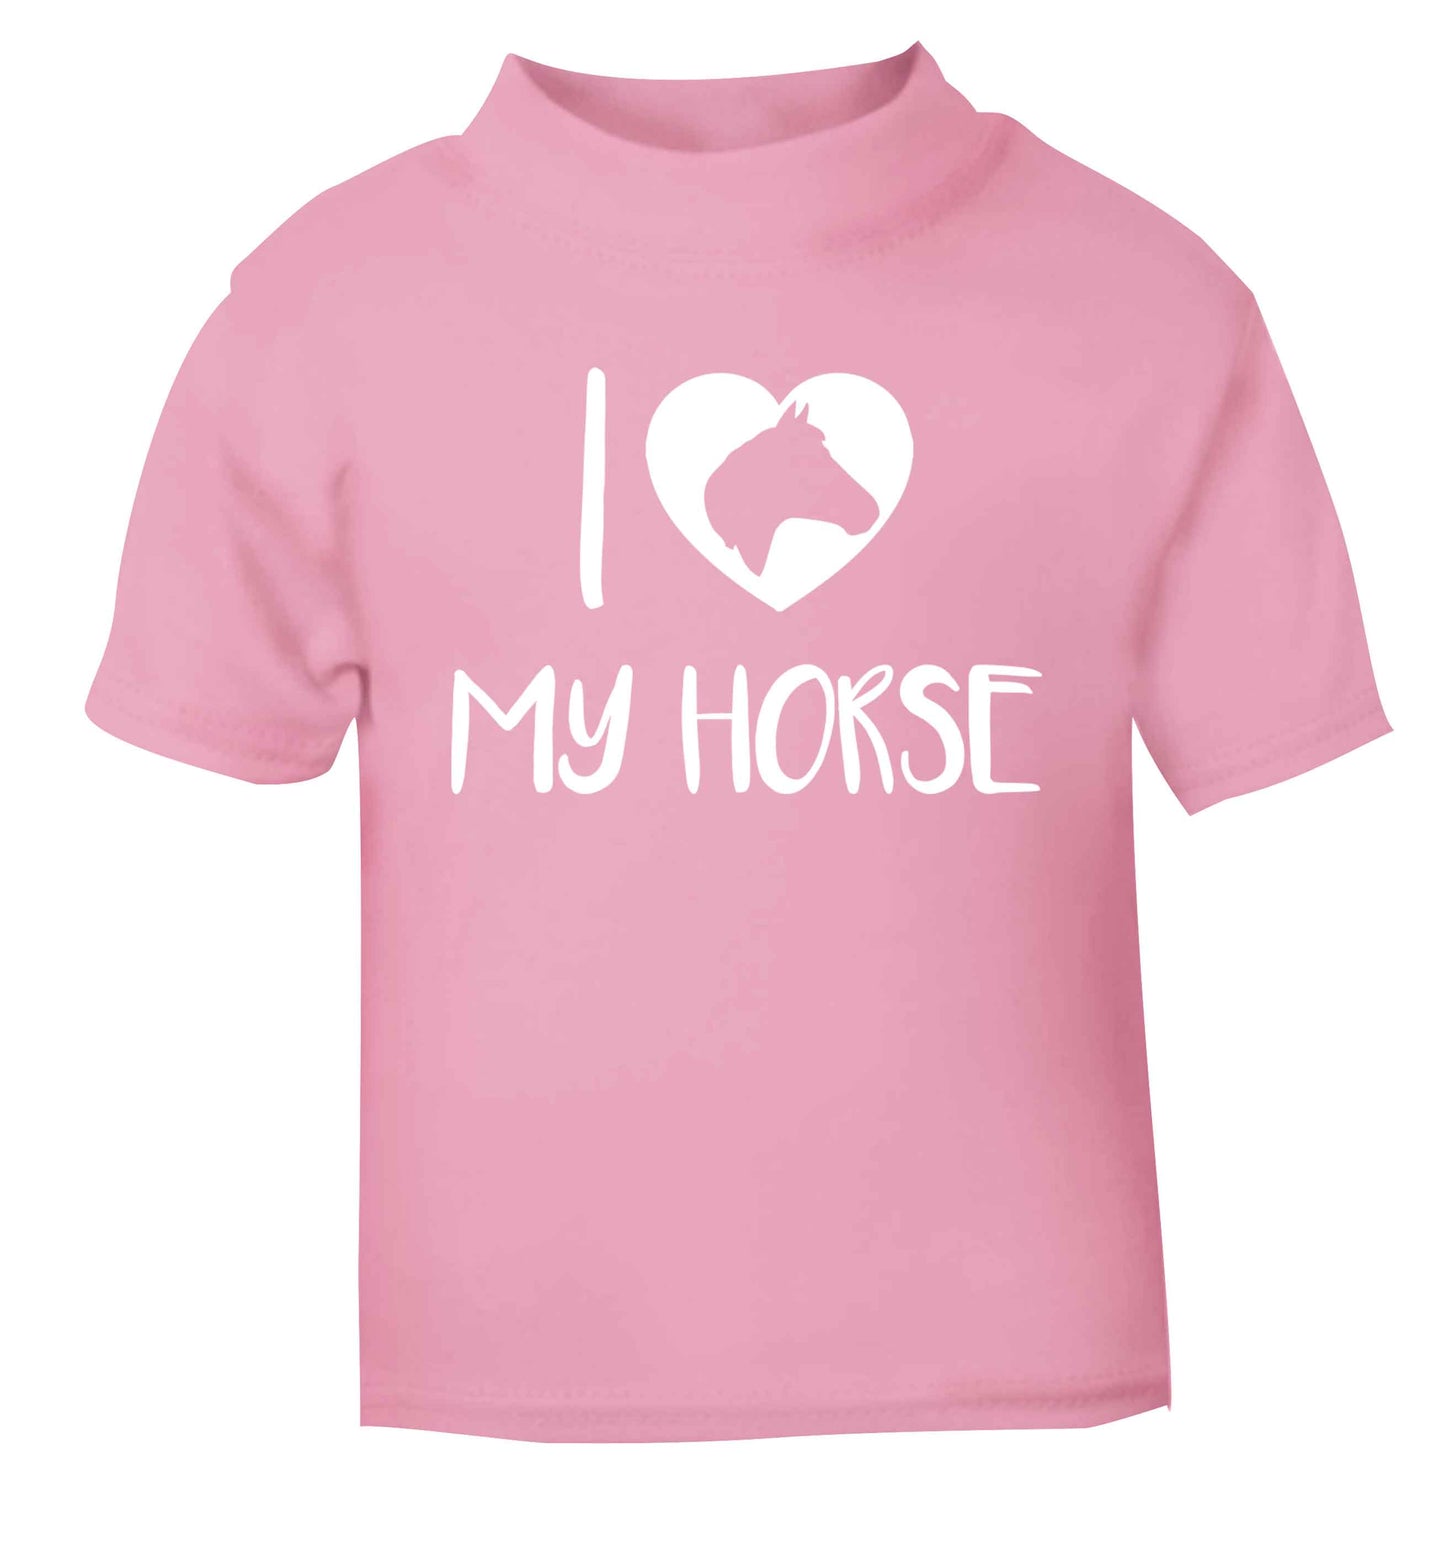 I love my horse light pink baby toddler Tshirt 2 Years